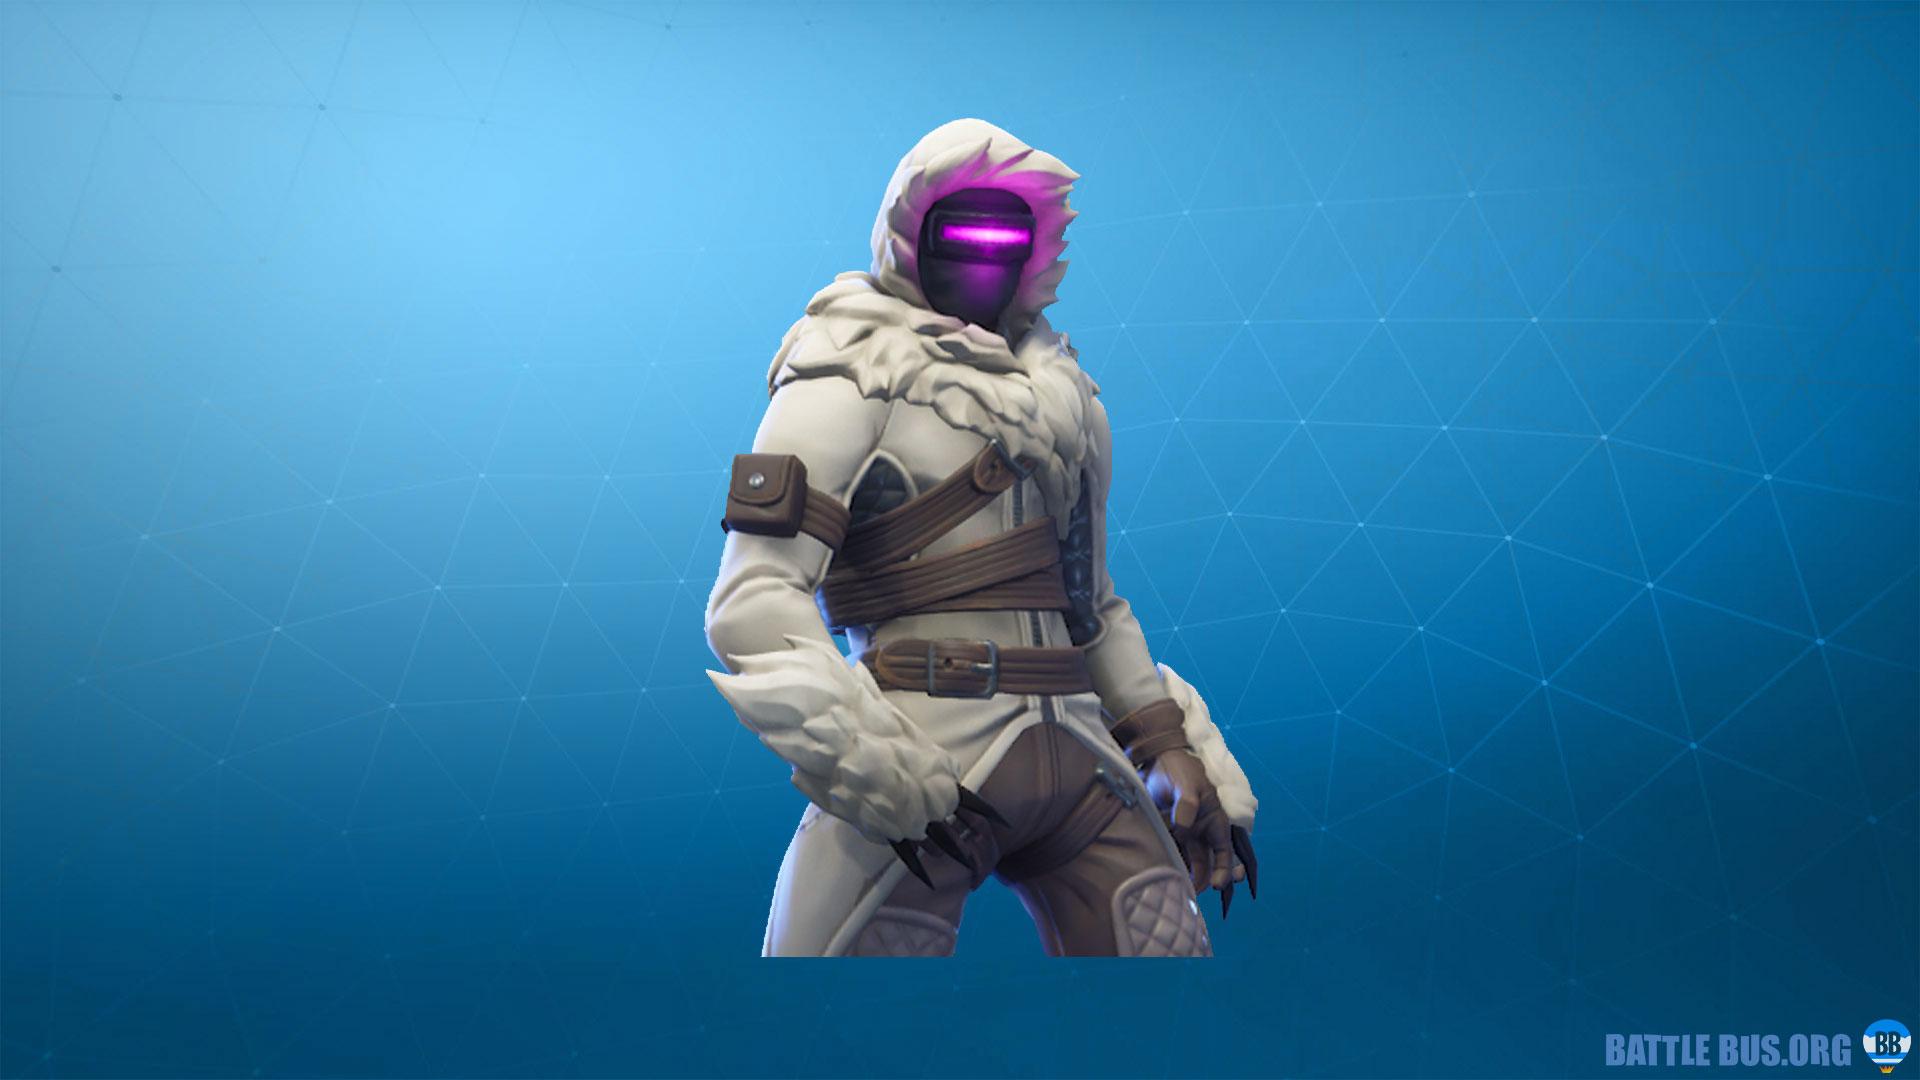 Zenith Fortnite outfit progressive skin, HD image and stats